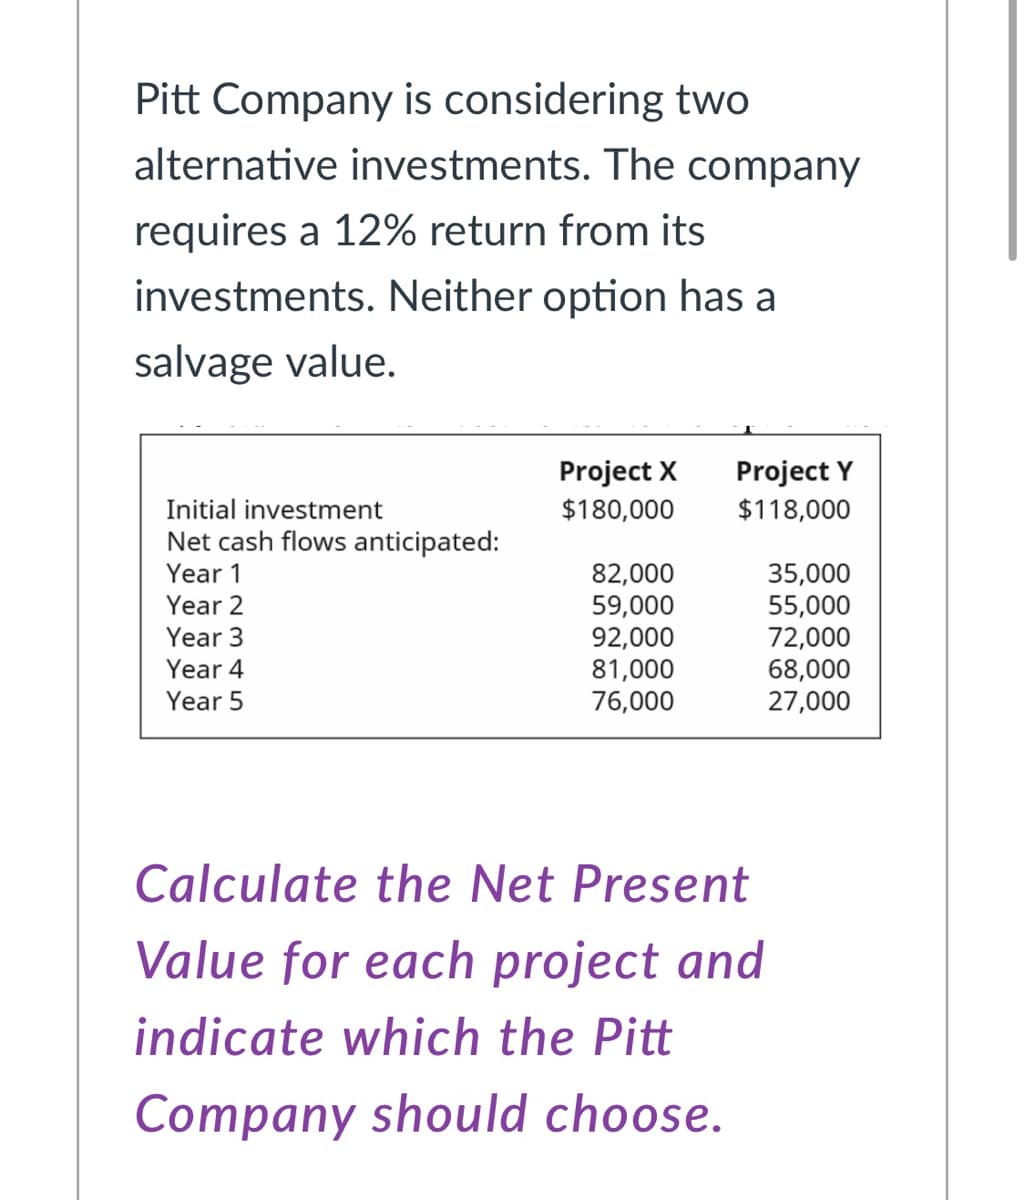 Pitt Company is considering two
alternative investments. The company
requires a 12% return from its
investments. Neither option has a
salvage value.
Project X
Project Y
Initial investment
$180,000
$118,000
Net cash flows anticipated:
Year 1
82,000
59,000
92,000
81,000
76,000
35,000
55,000
72,000
68,000
27,000
Year 2
Year 3
Year 4
Year 5
Calculate the Net Present
Value for each project and
indicate which the Pitt
Company should choose.
